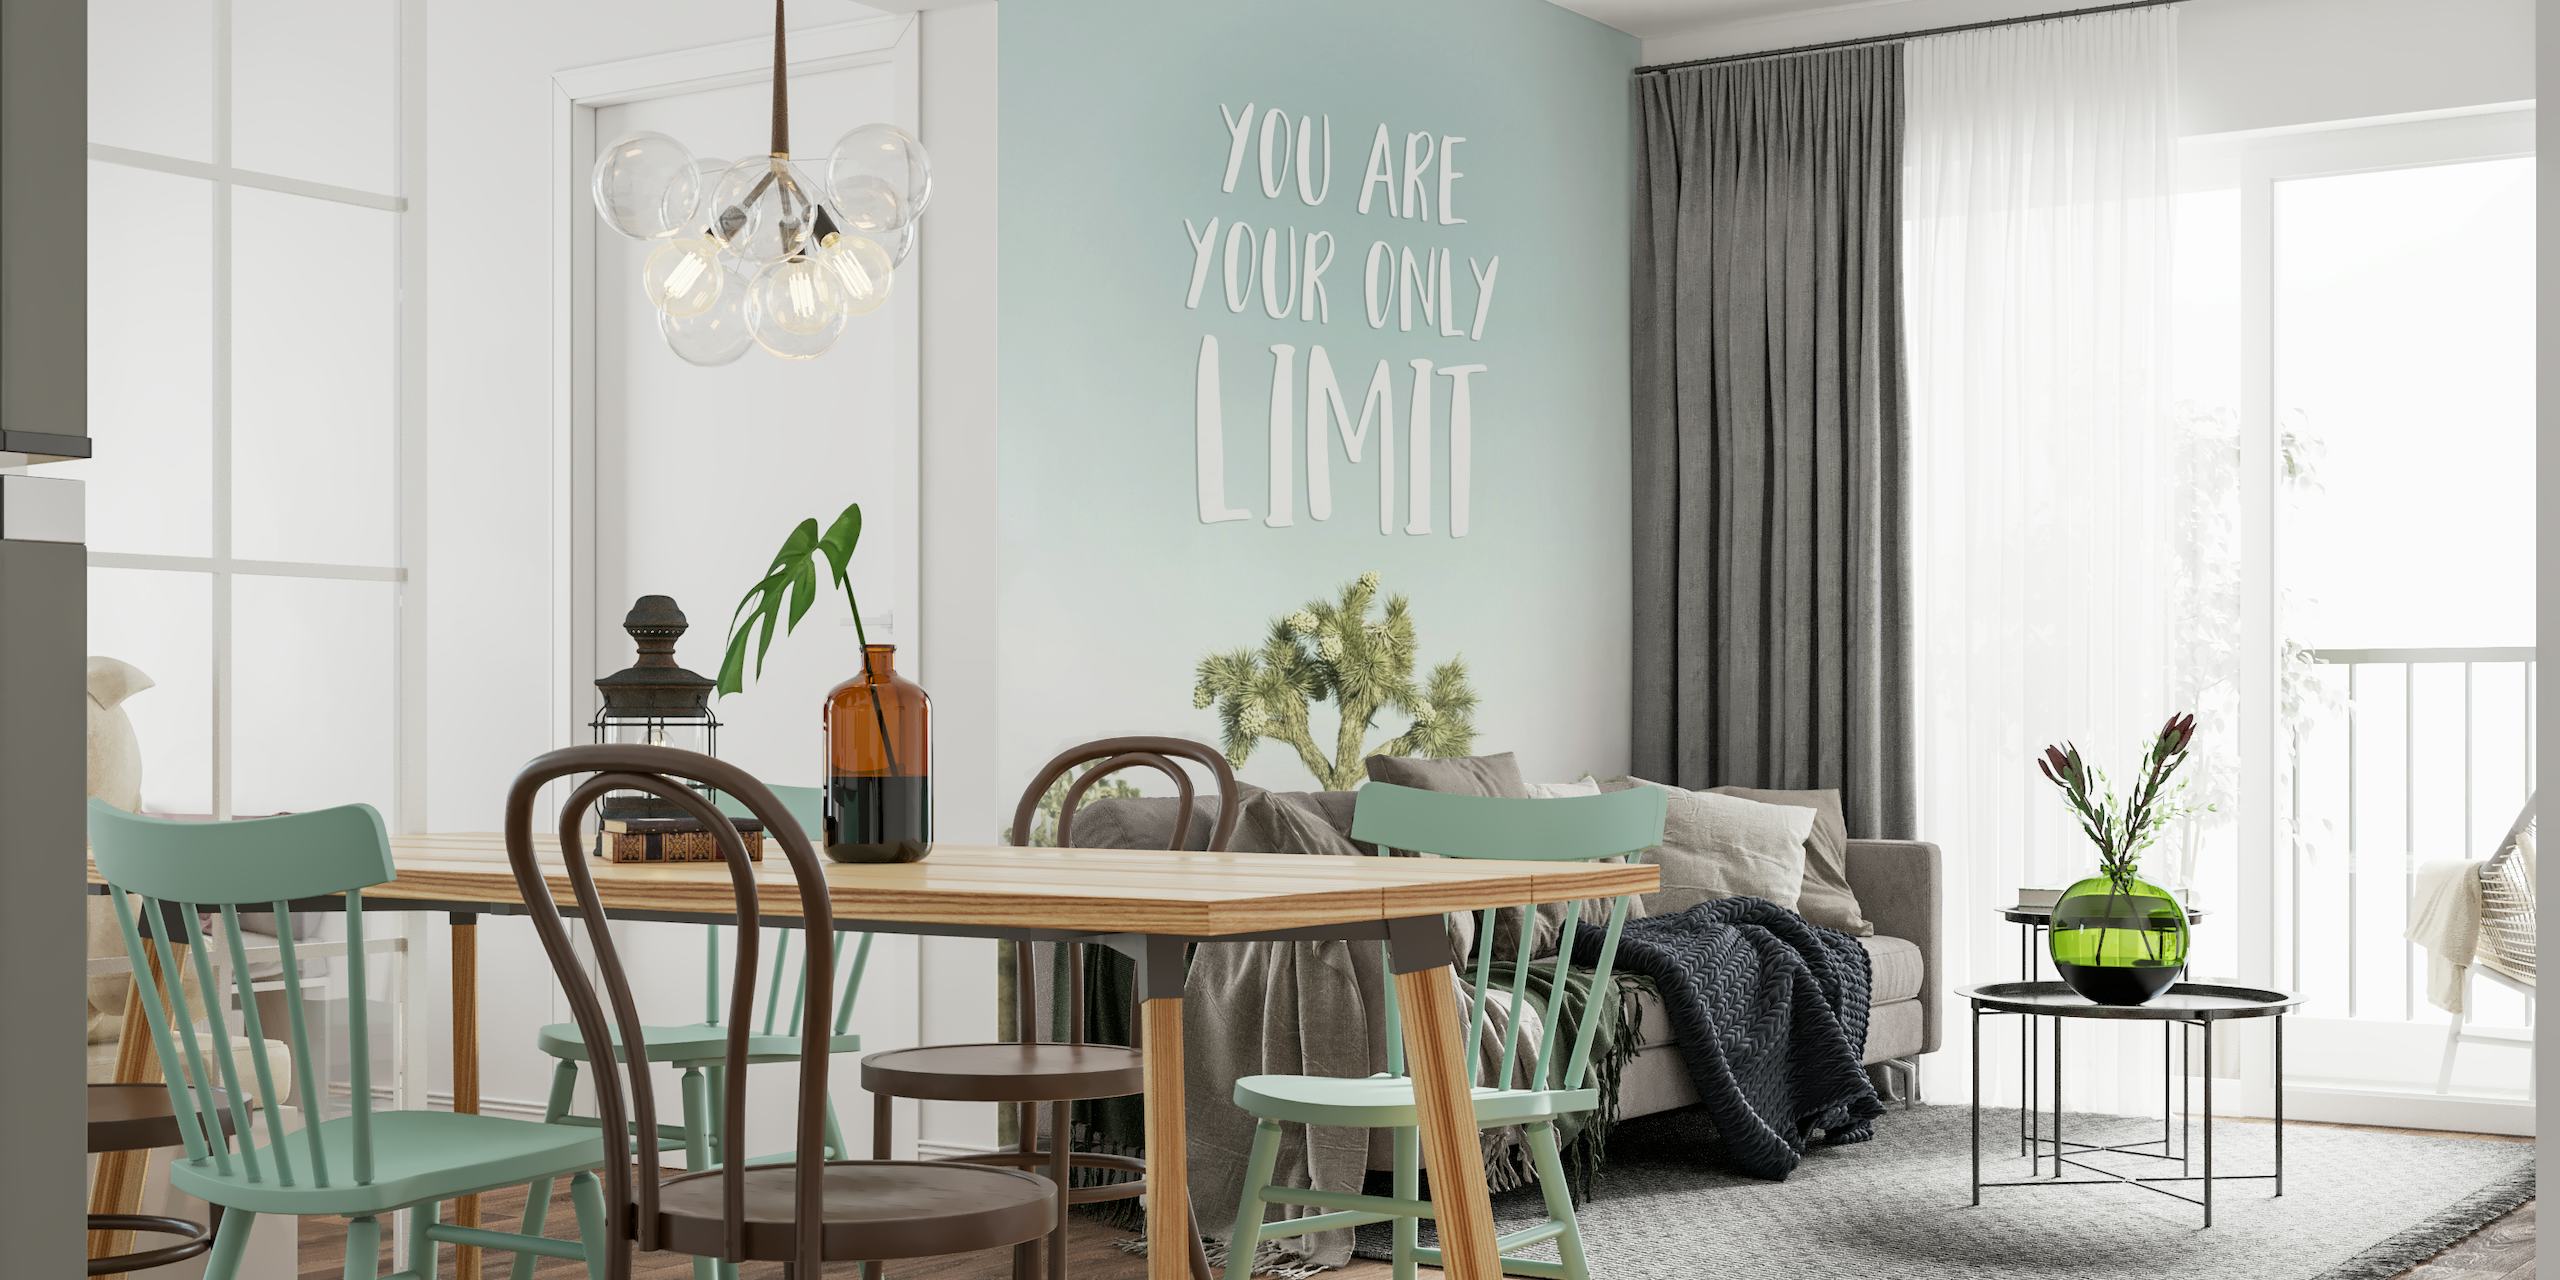 Inspirational tree landscape wall mural with 'You are your only limit' text